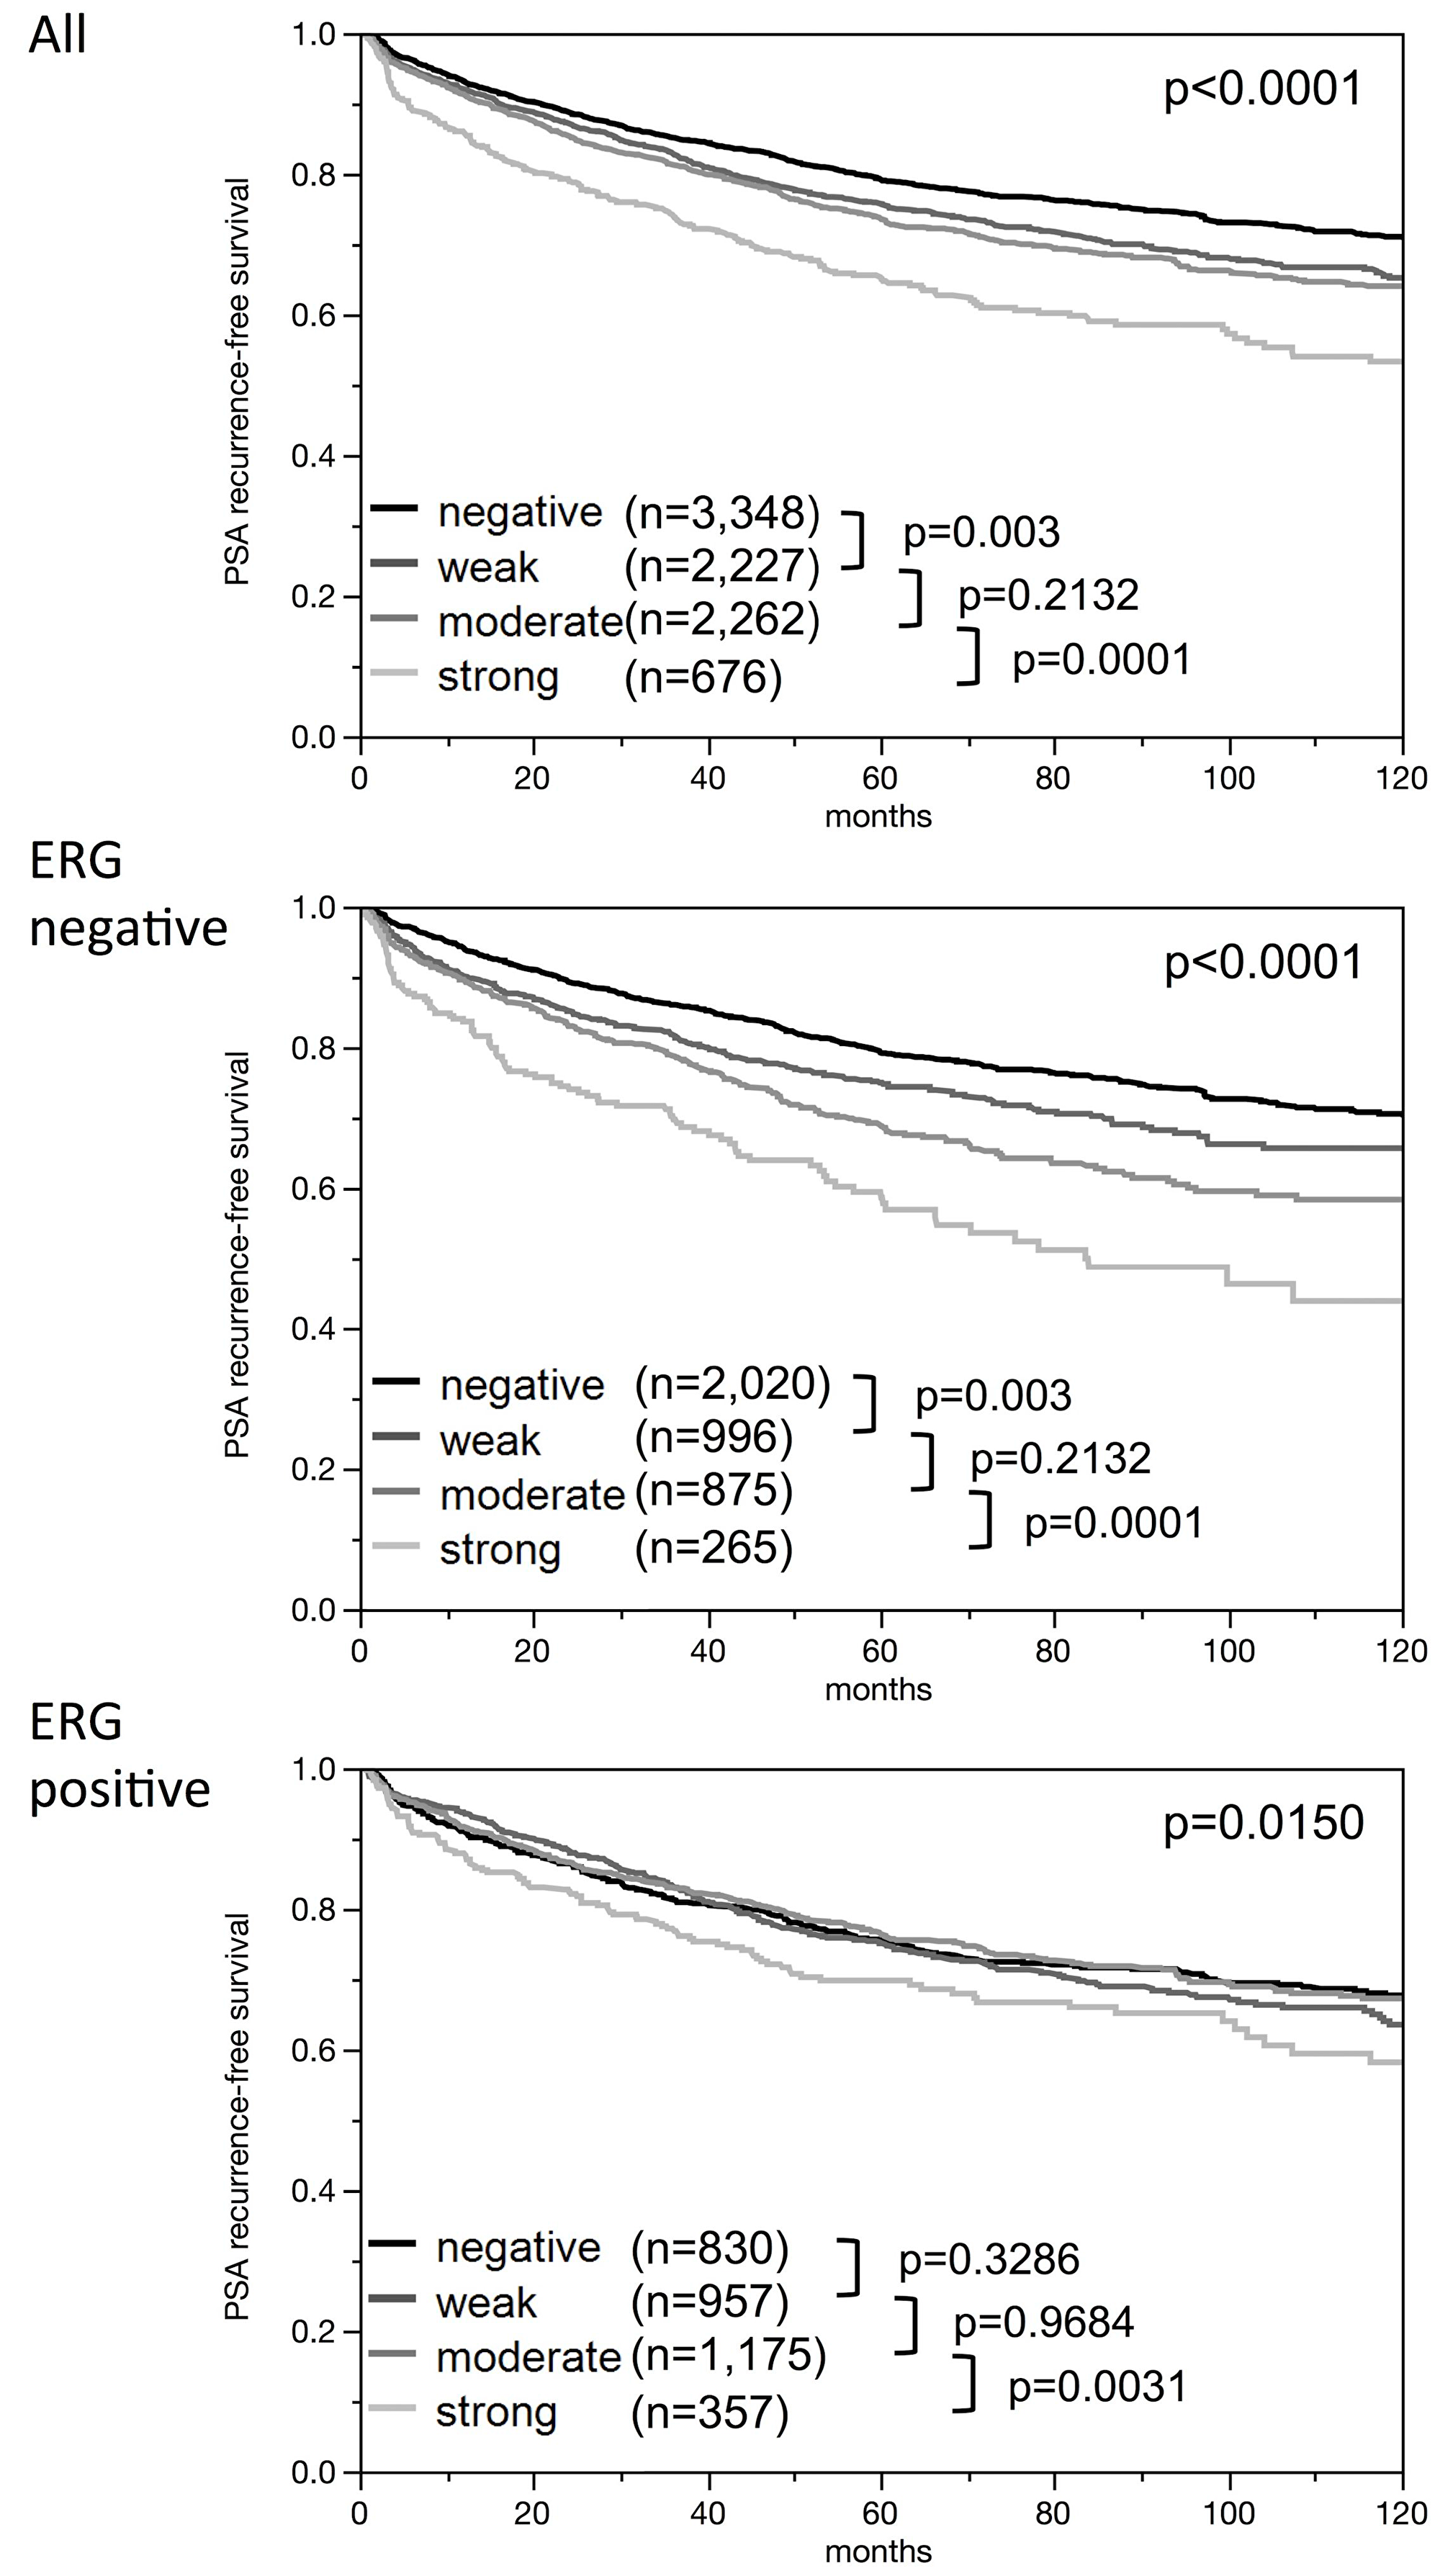 Kaplan-Meier plots of prostate specific antigen (PSA) recurrence after radical prostatectomy and ELAC2 staining in all cancers, the ERG negative subset, and the ERG positive subset.